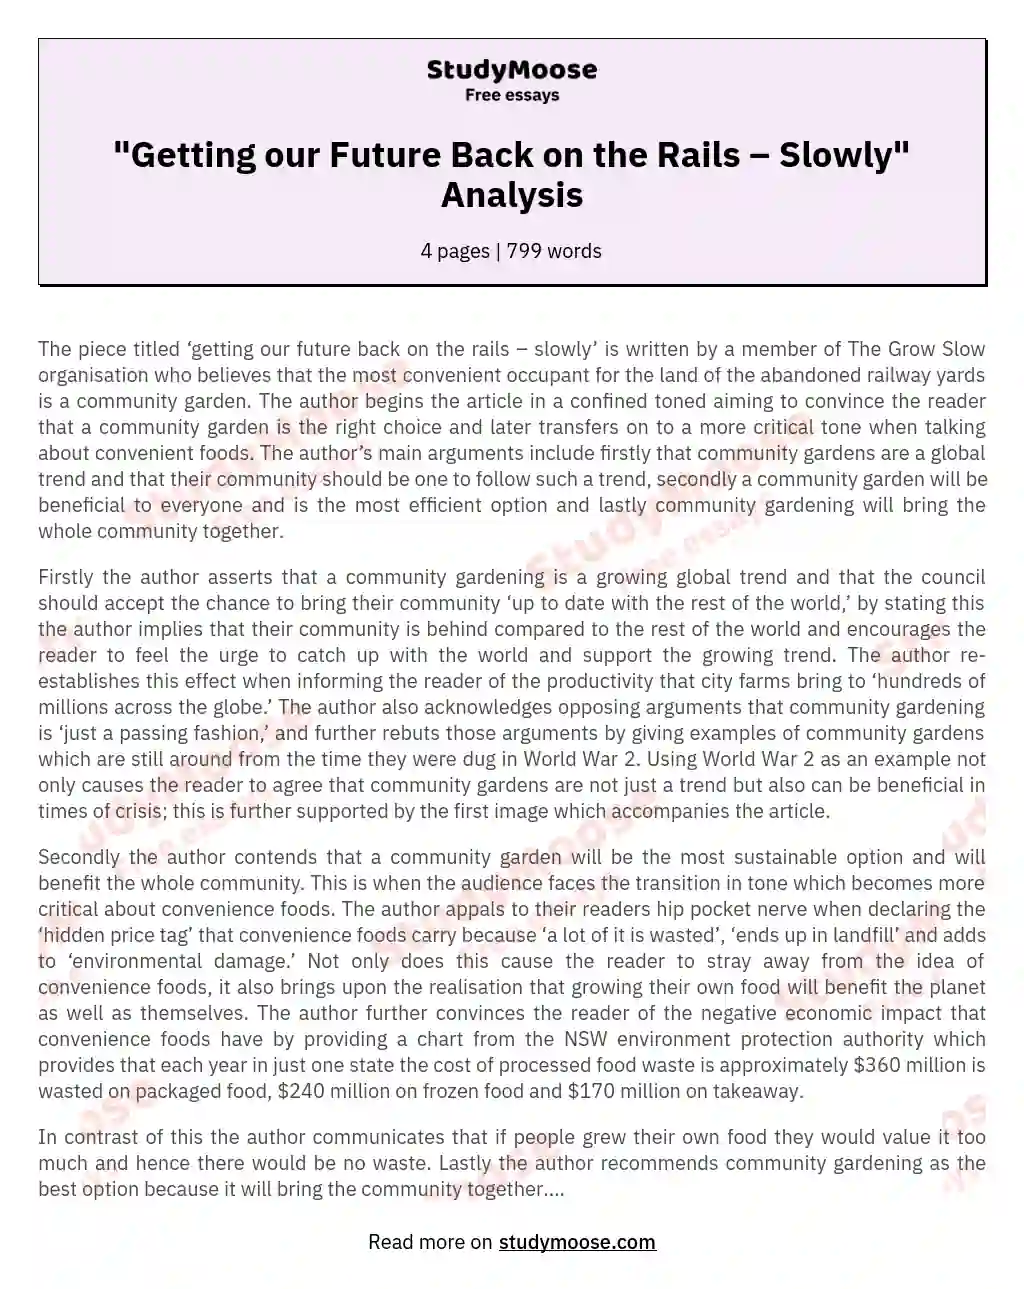 "Getting our Future Back on the Rails – Slowly" Analysis essay